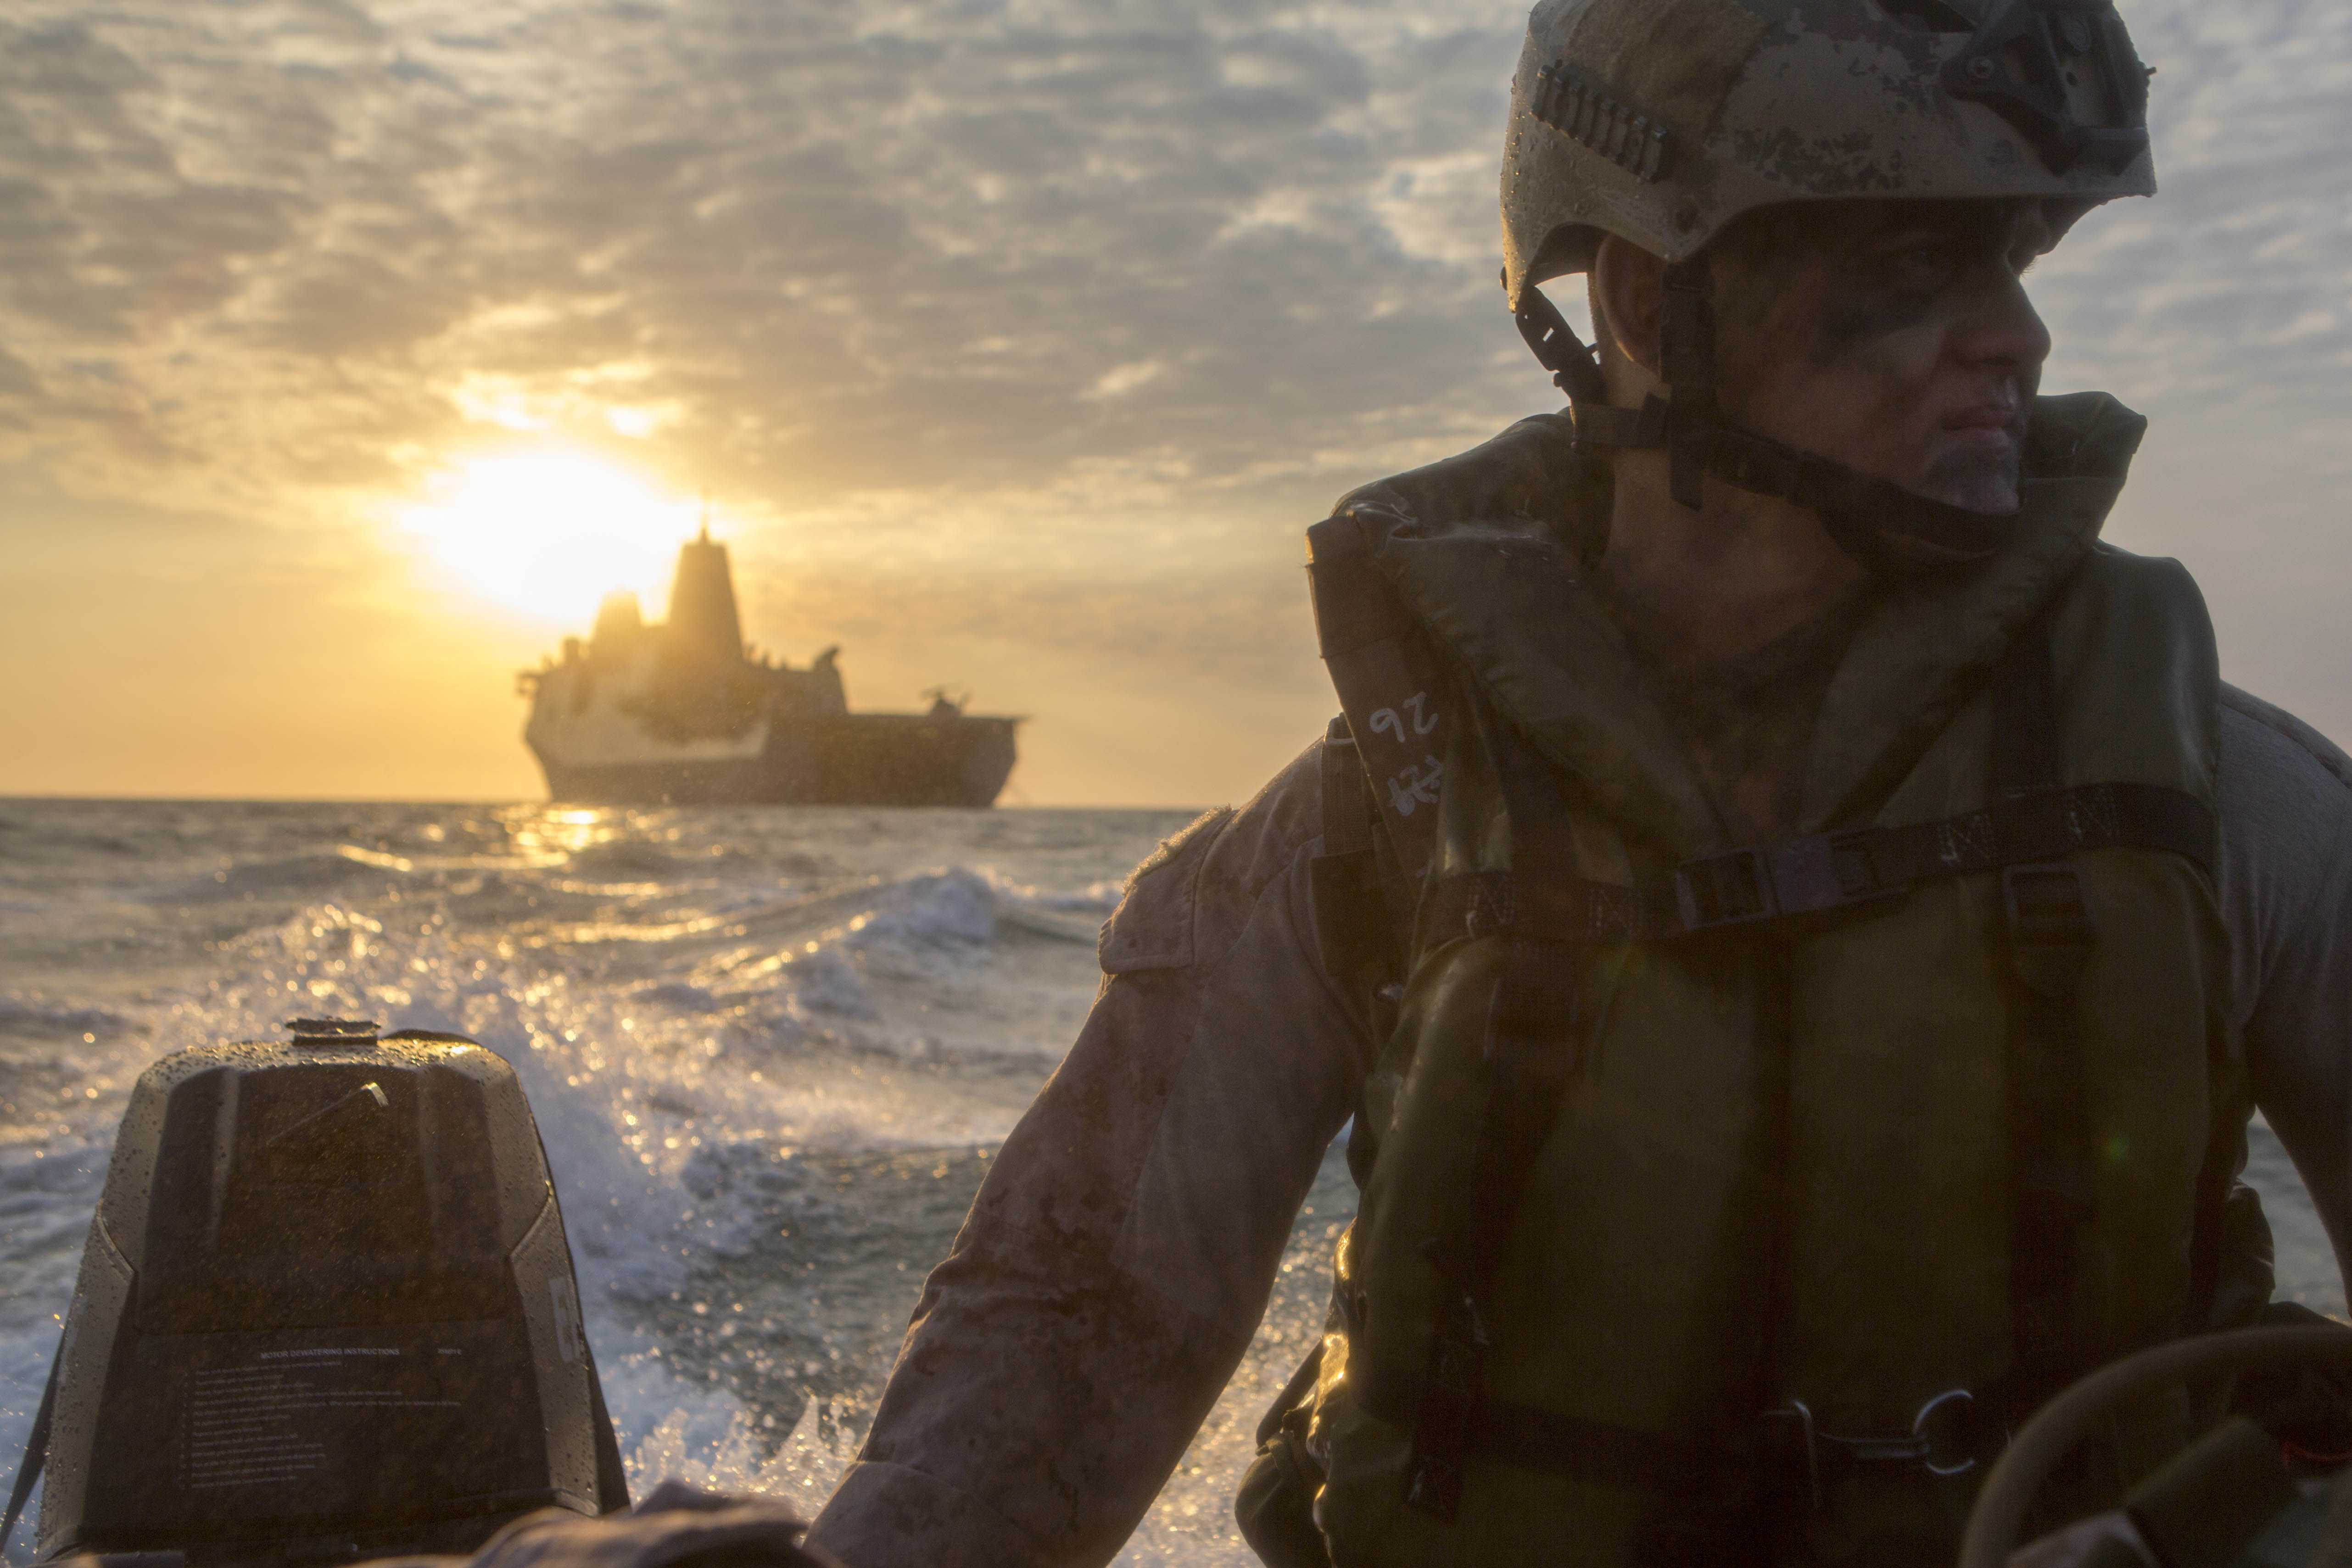 U.S. Marine Corps Lance Cpl. Chance Seckenger rides in a Combat Rubber Raiding Craft from the well deck of the USS Green Bay (LPD-20), at sea, July 9, 2015. US Marine Corps Photo